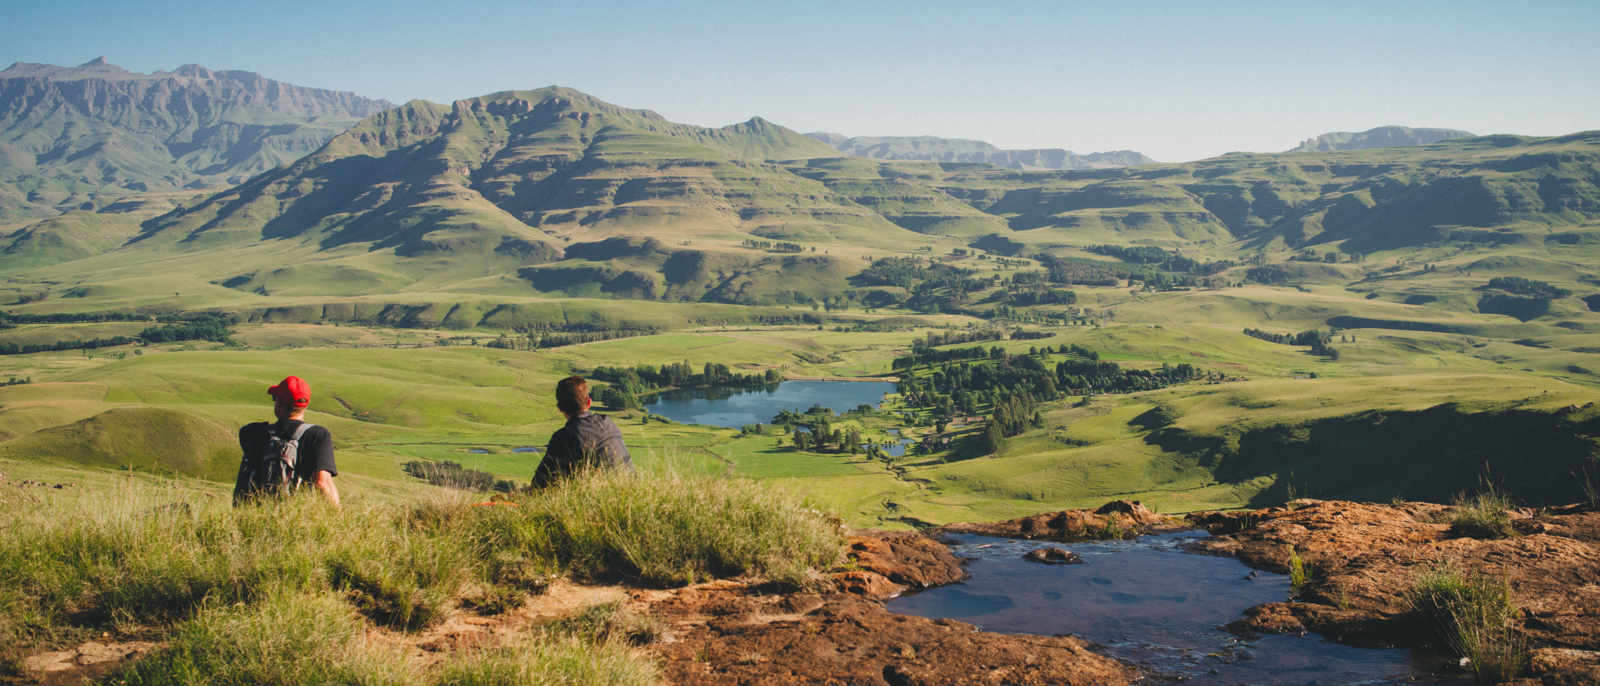 01 Hikers having a rest in the mountains of the DRakensberg overlooking the southern drakensberg valley